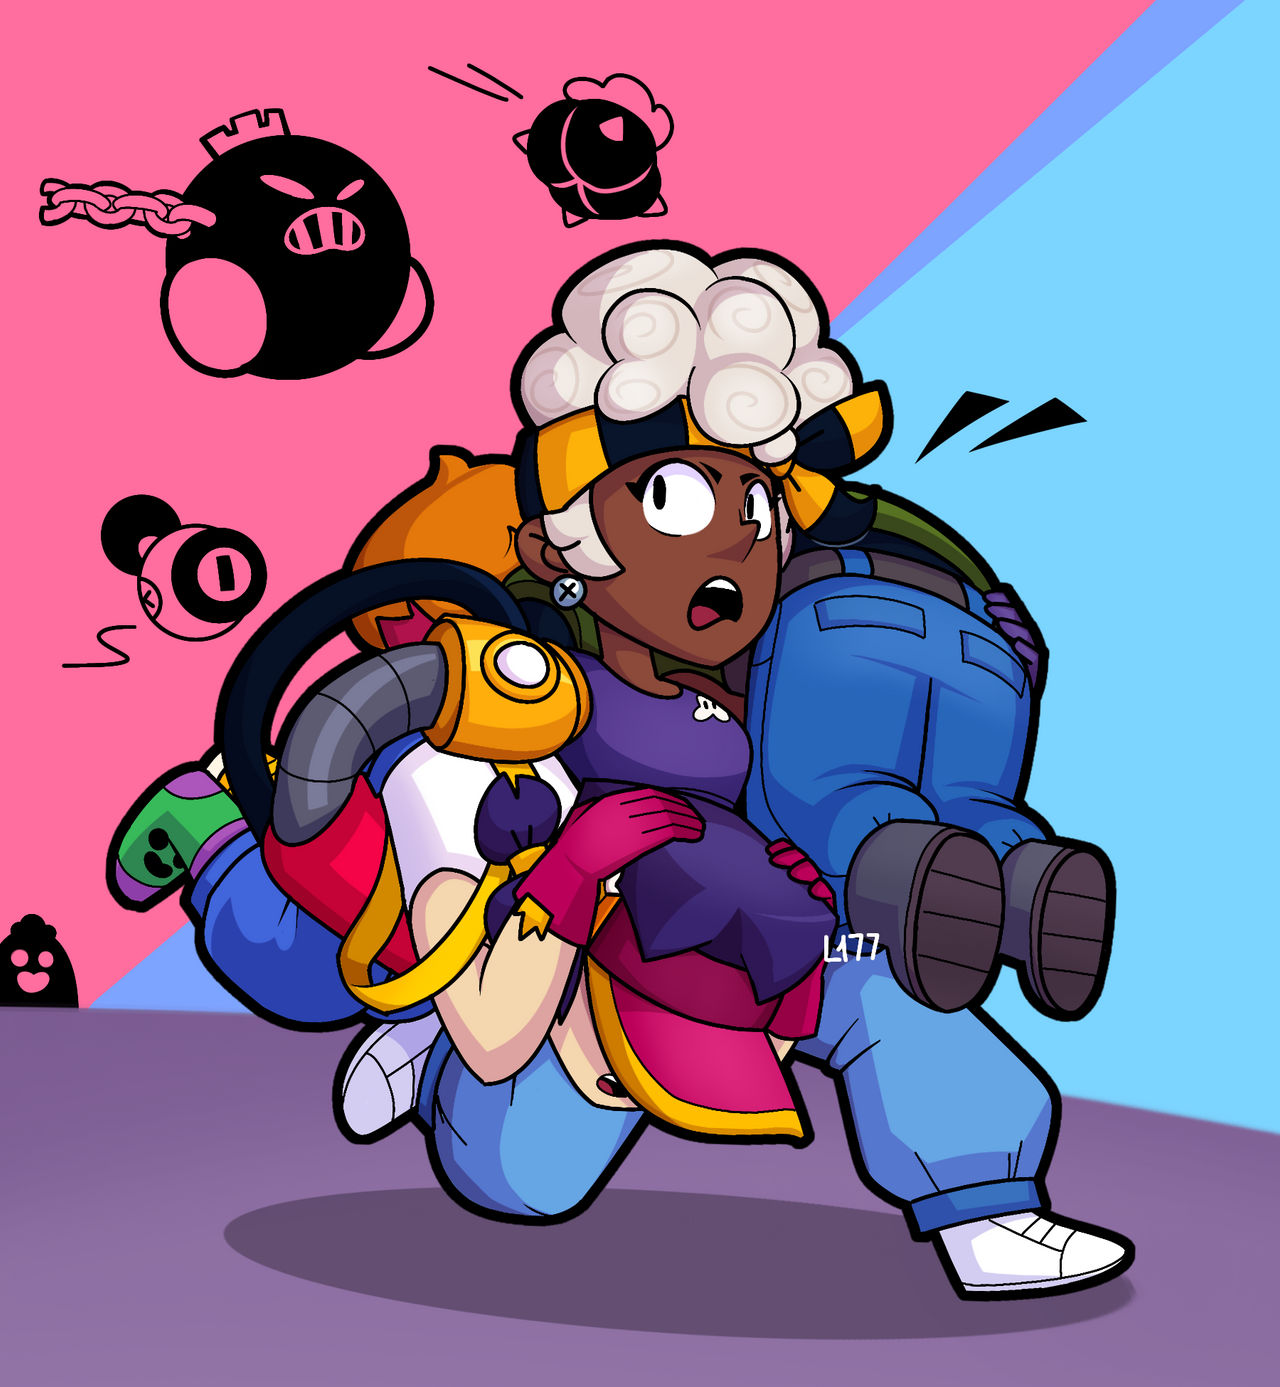 Maisie saves Fang and Buster  Brawl Stars by Lazuli177 on DeviantArt